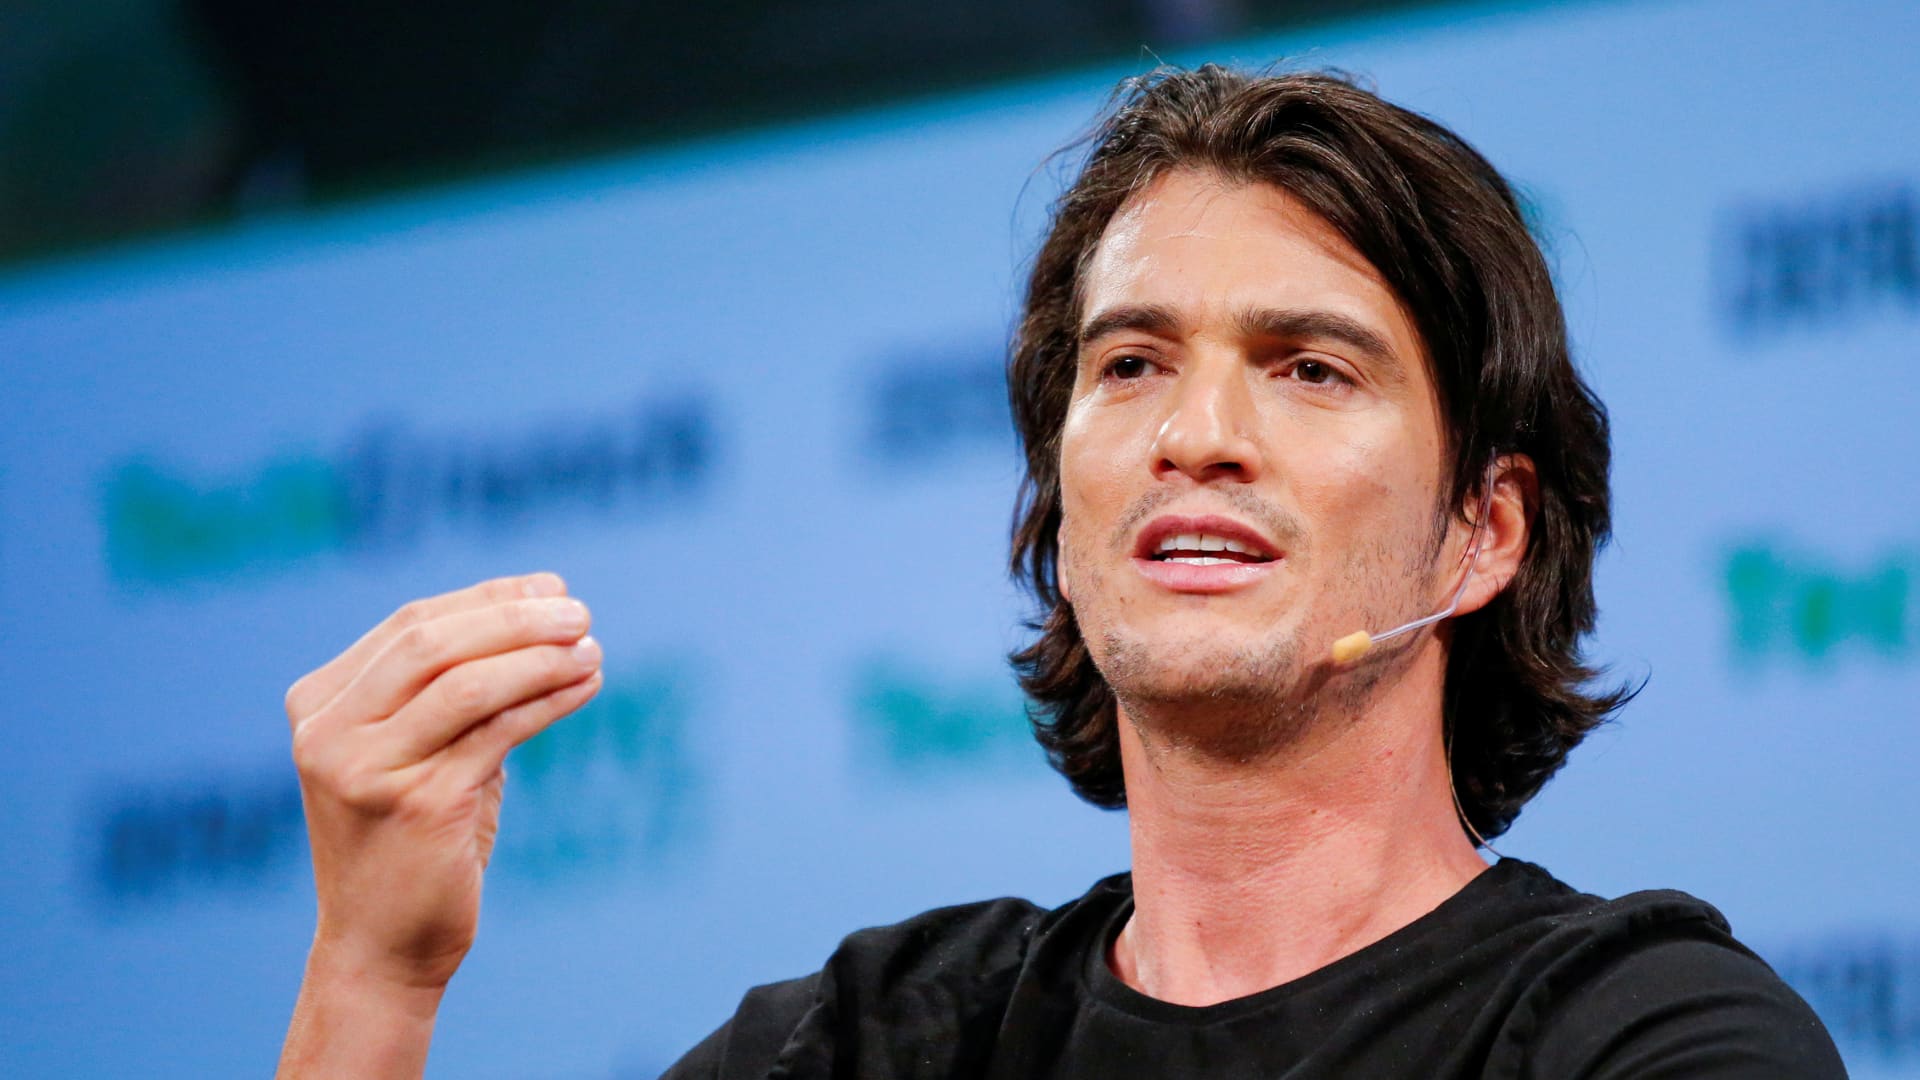 Andreessen Horowitz announces plans to invest in Adam Neumann’s new residential real estate company